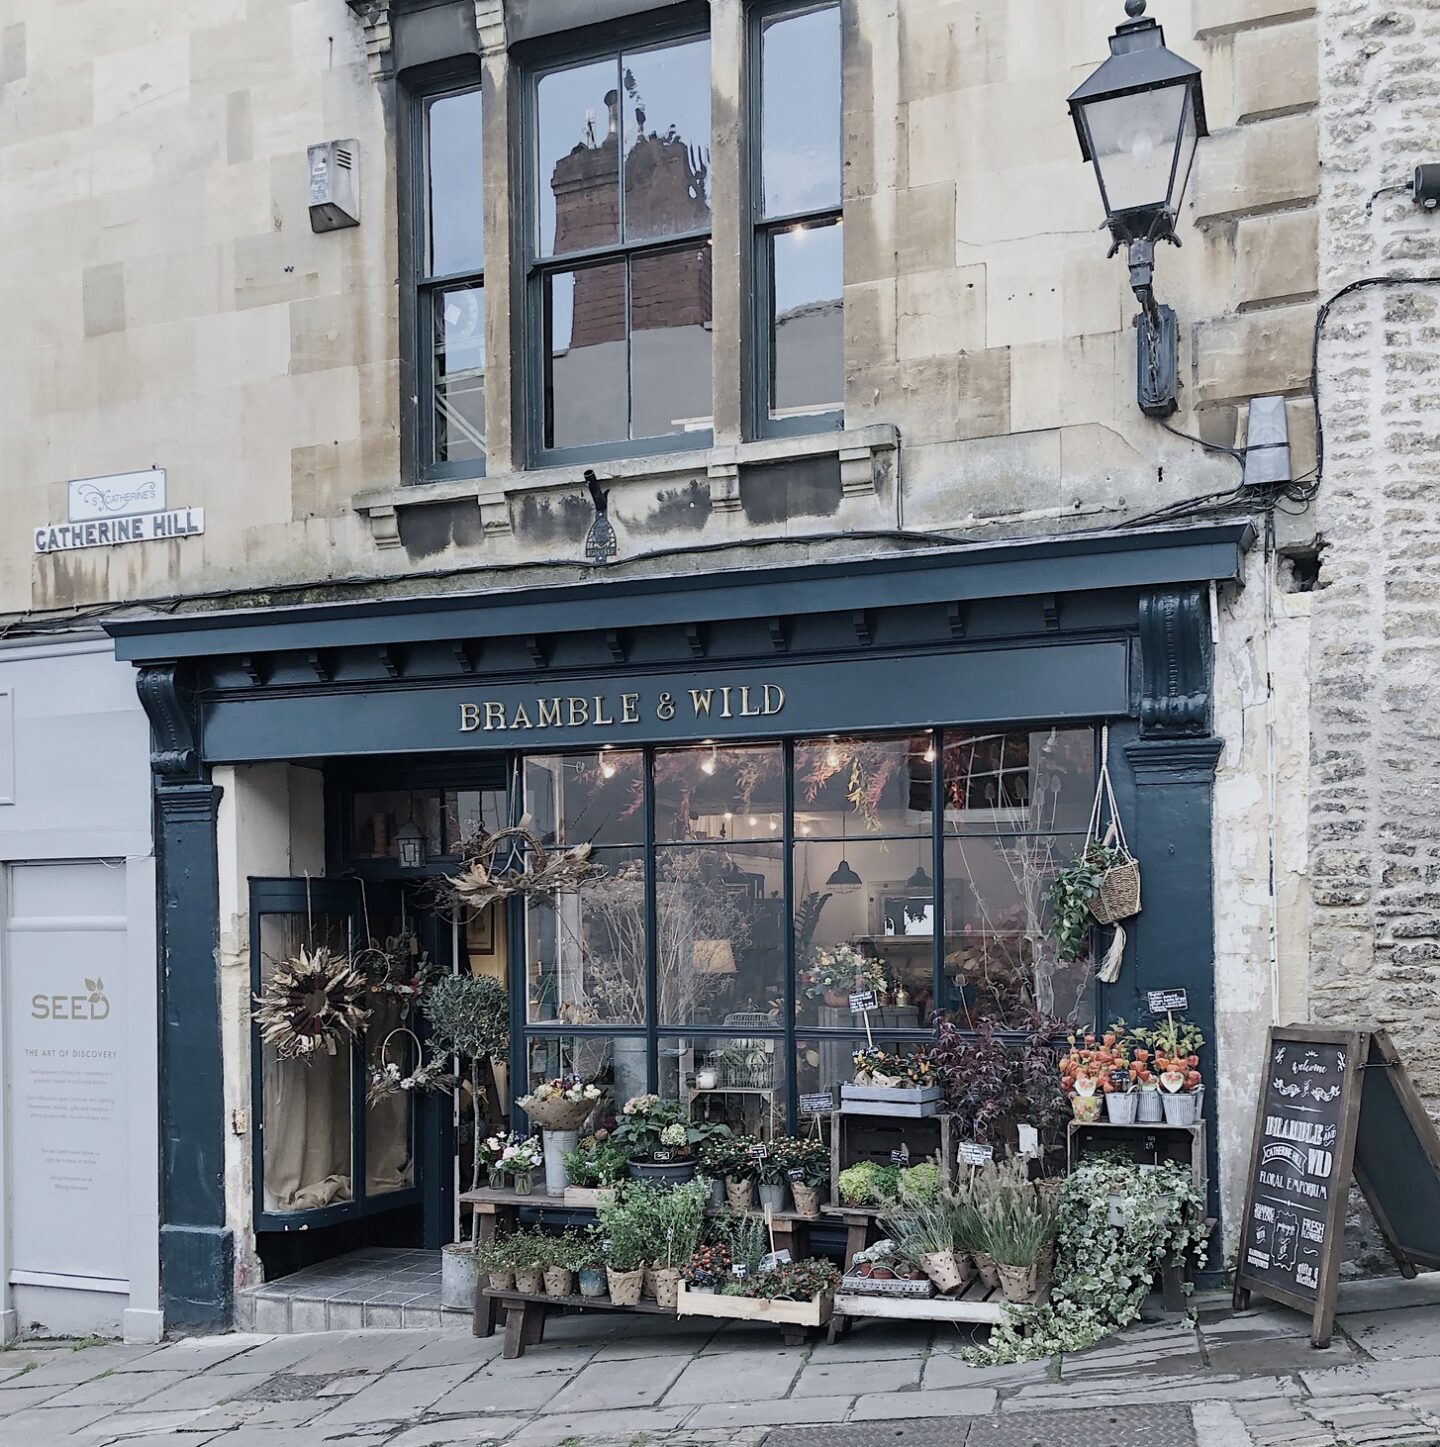 Facade and plants of Bramble & Wild shop in Frome